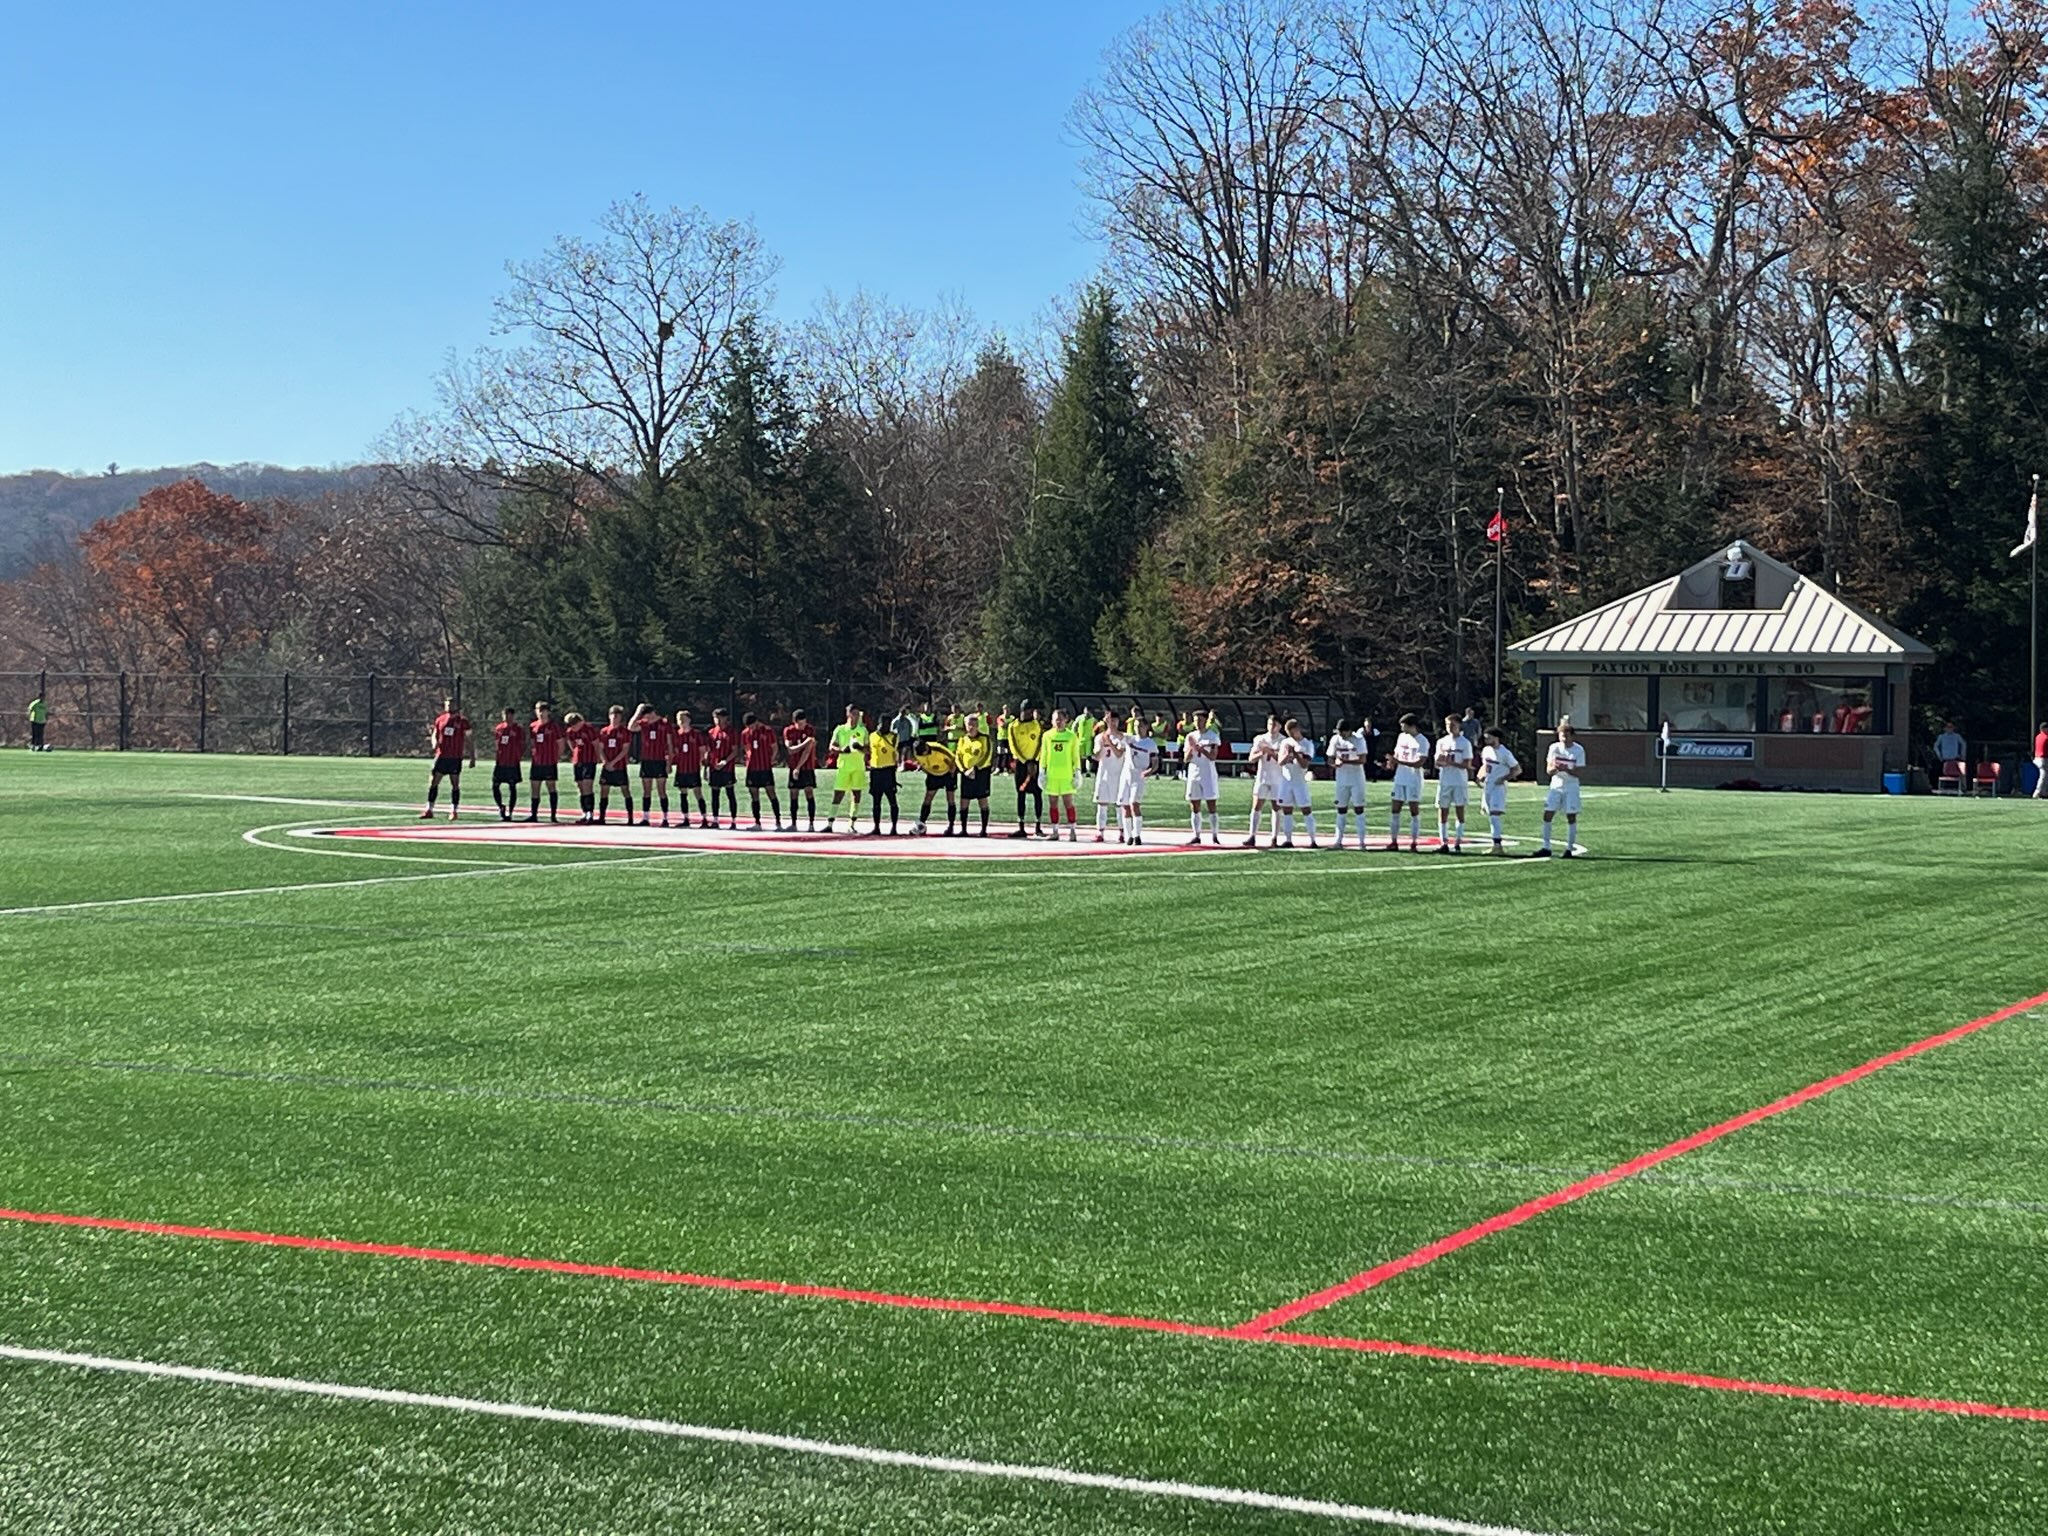 Oneonta and Brockport Advance to SUNYAC Men's Soccer Championship